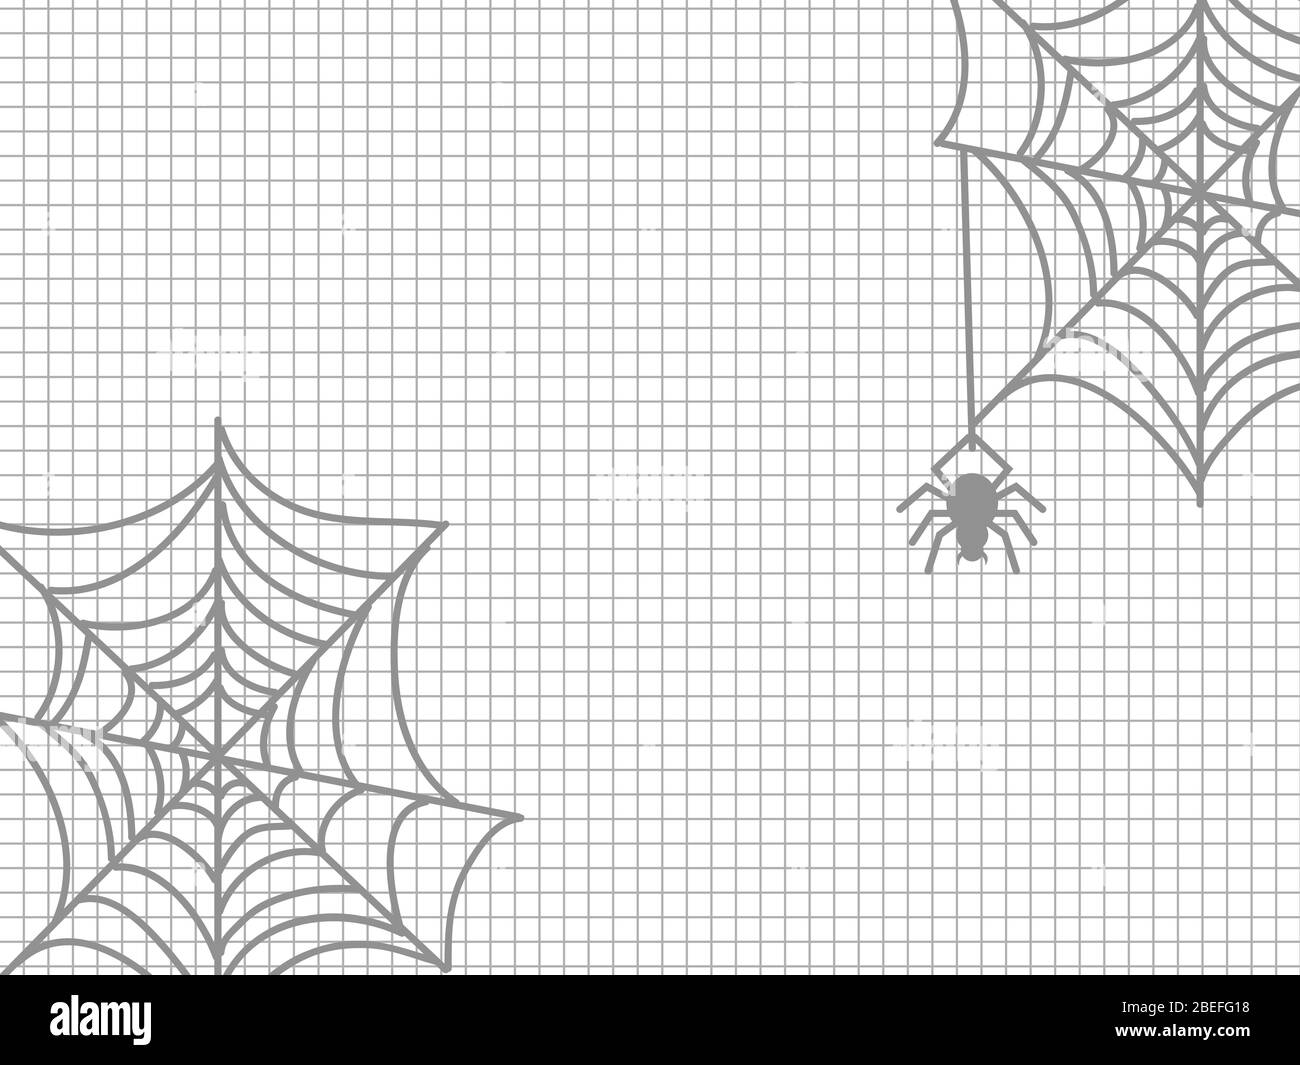 Spider and cobweb on notebook page - halloween notebook background. Vector illustration Stock Vector